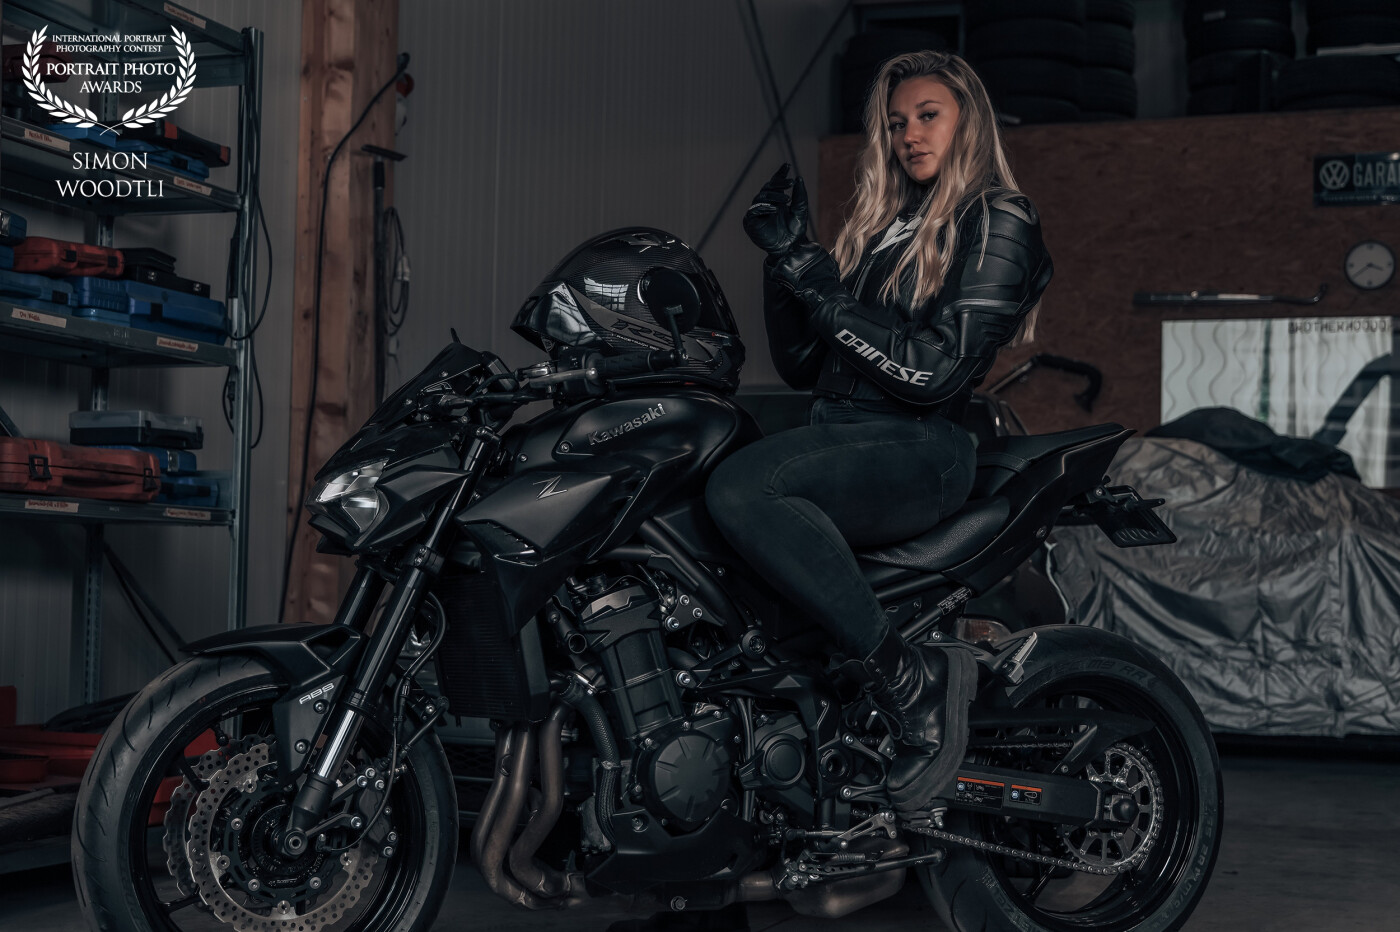 It was the first shoot with Chäntu. She is a passionate motorcyclist. So we thought before the motorbike season starts, we'll start with a motorbike shoot.